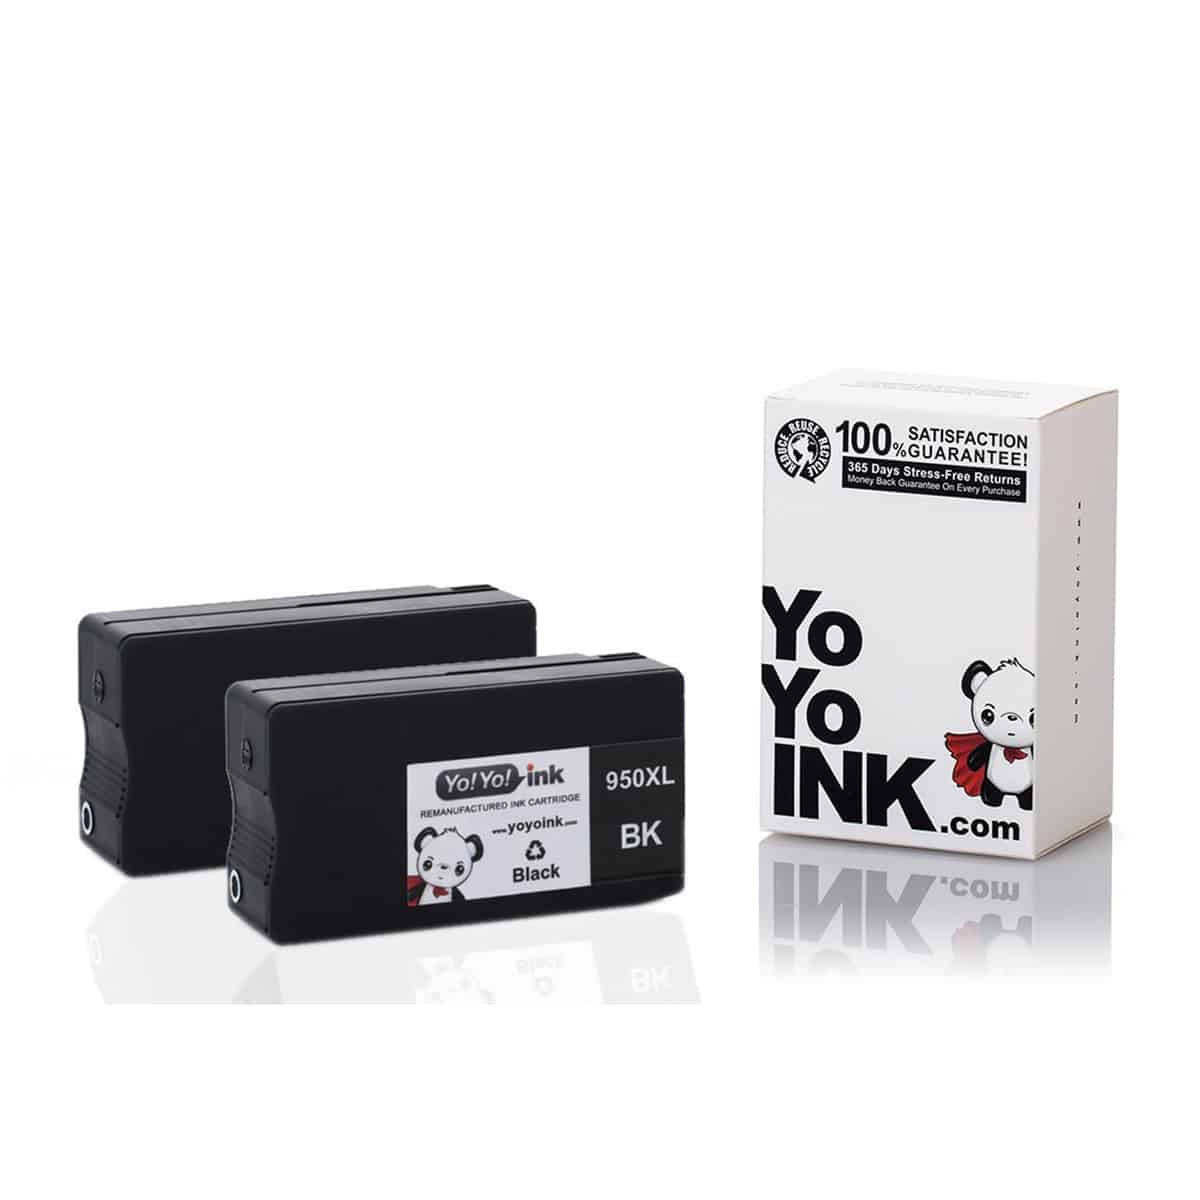 Get compatible HP 950XL/951XL Ink Cartridges (4 Combo Pack